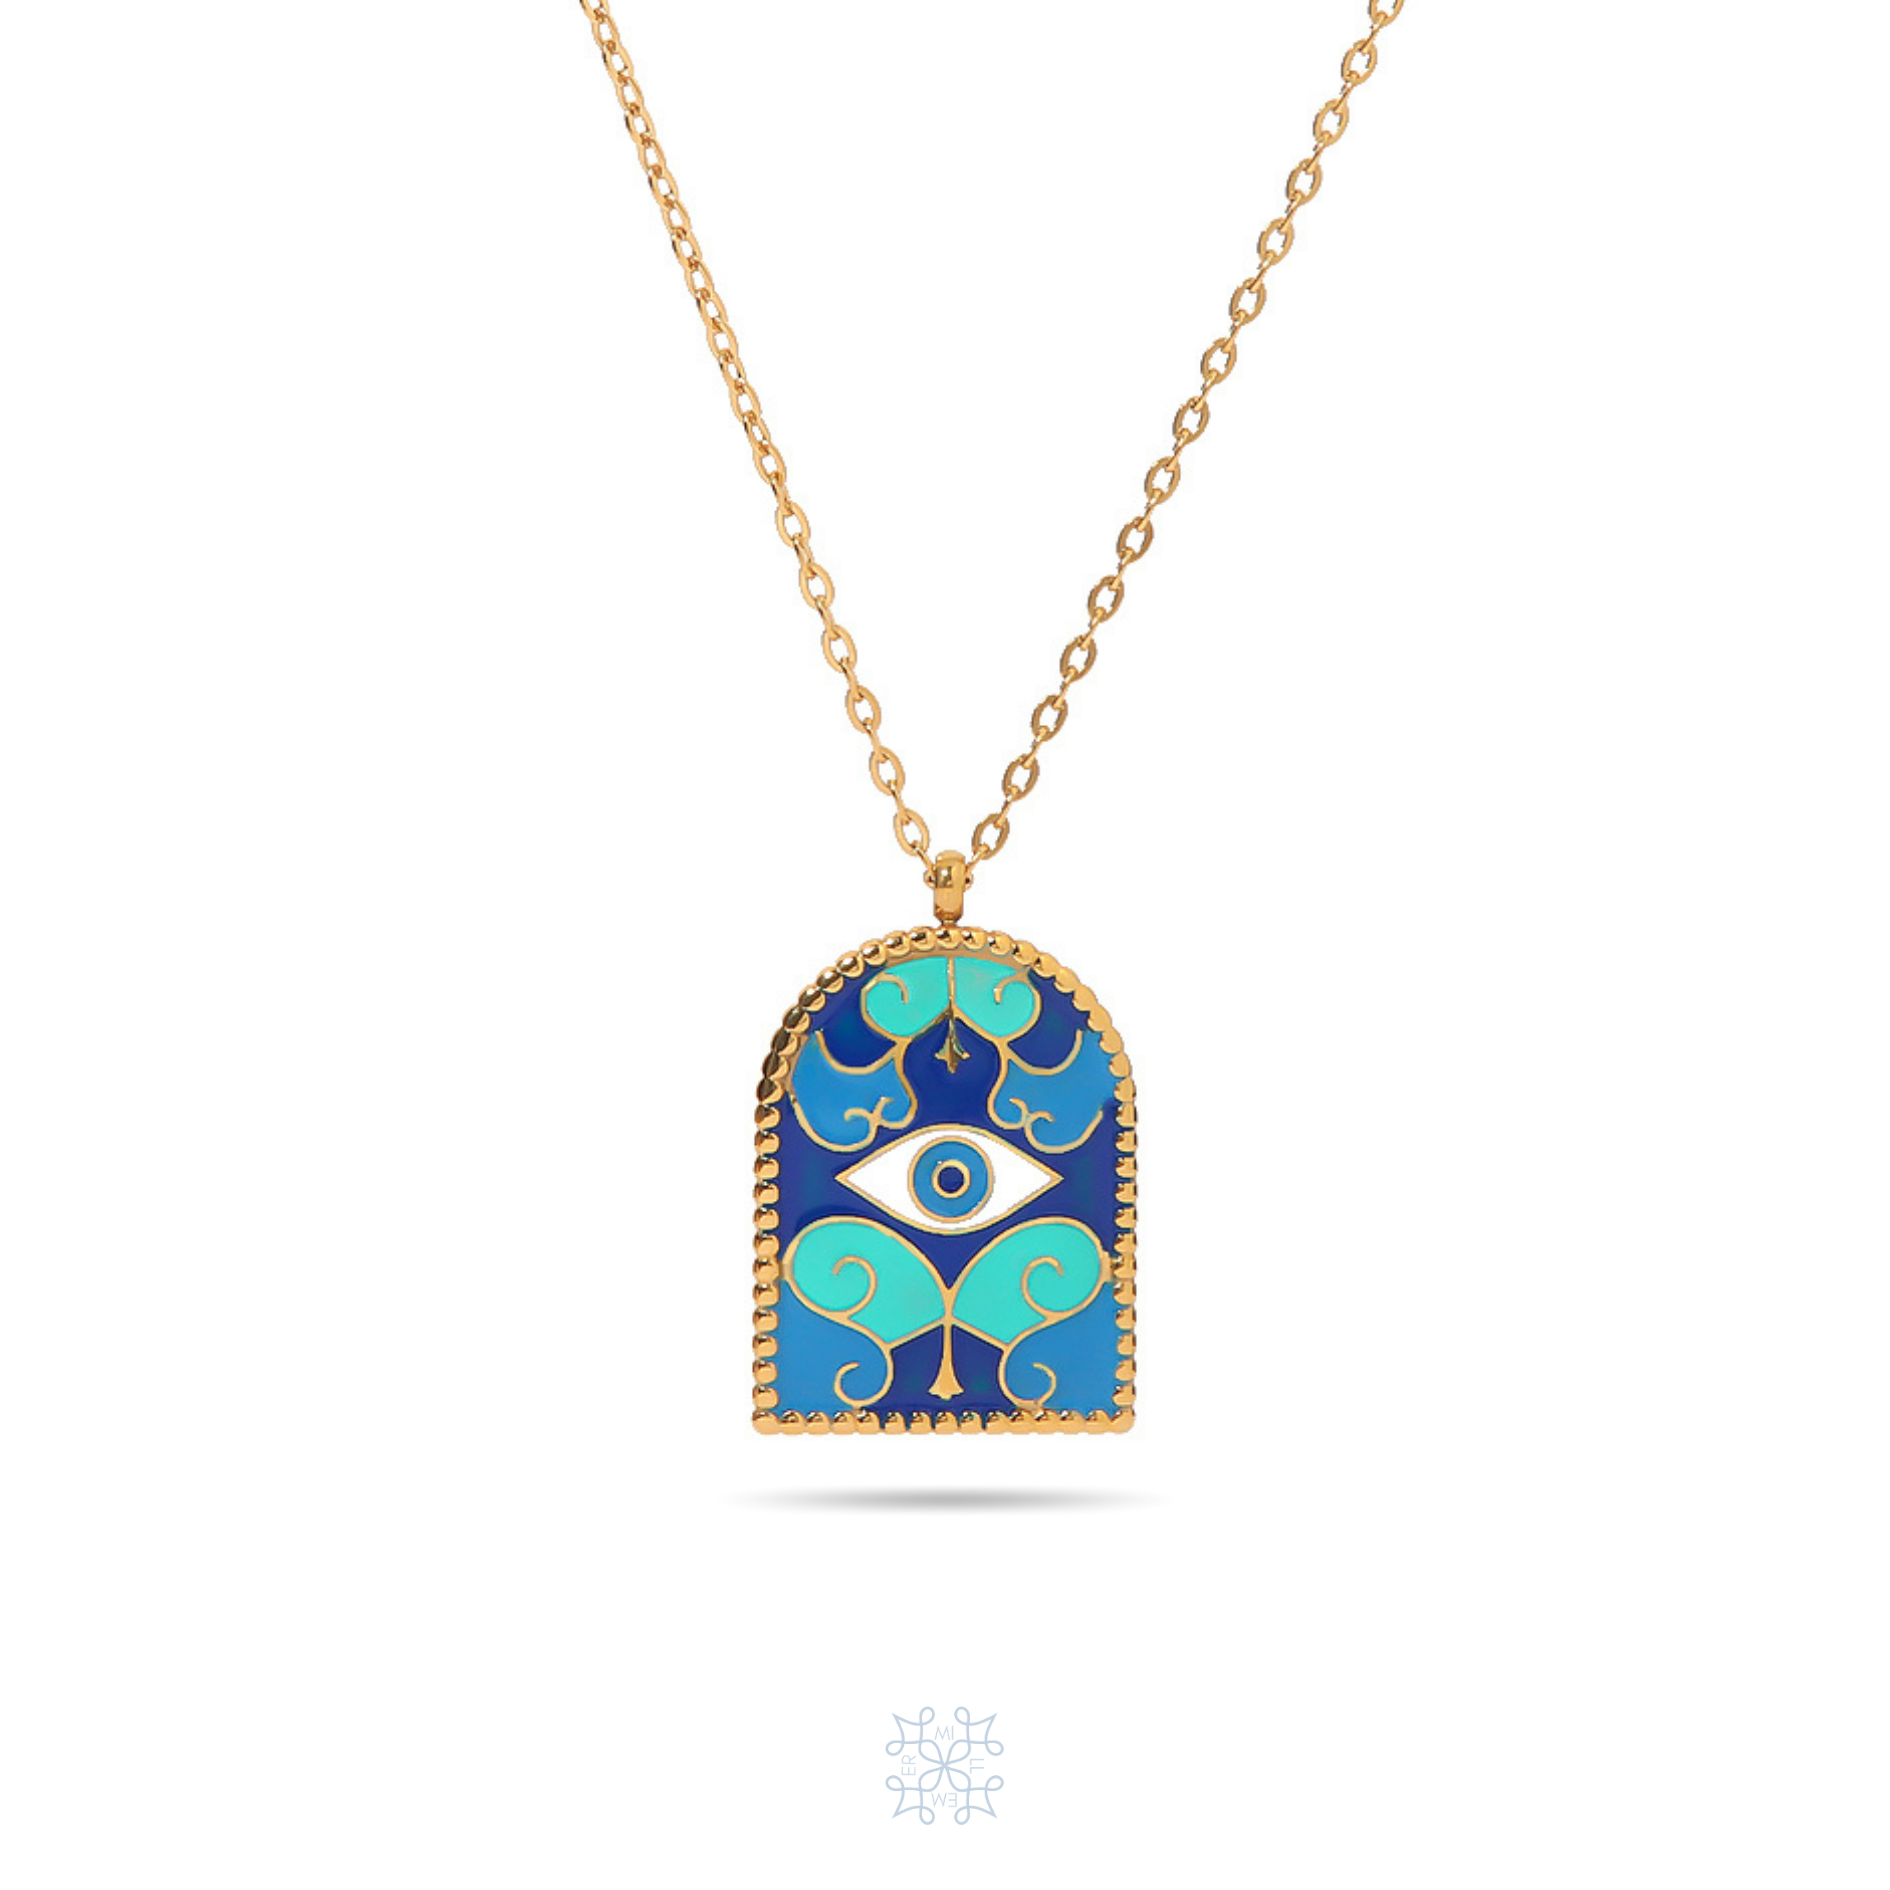 Gold plated chain necklace. Painted in blue , white and green enamel. the shapes of the enamel painting mimic the sea waves . In the middle of the pendant is painted an enamel eye. Ocean Pendant Blue Enamel Necklace.